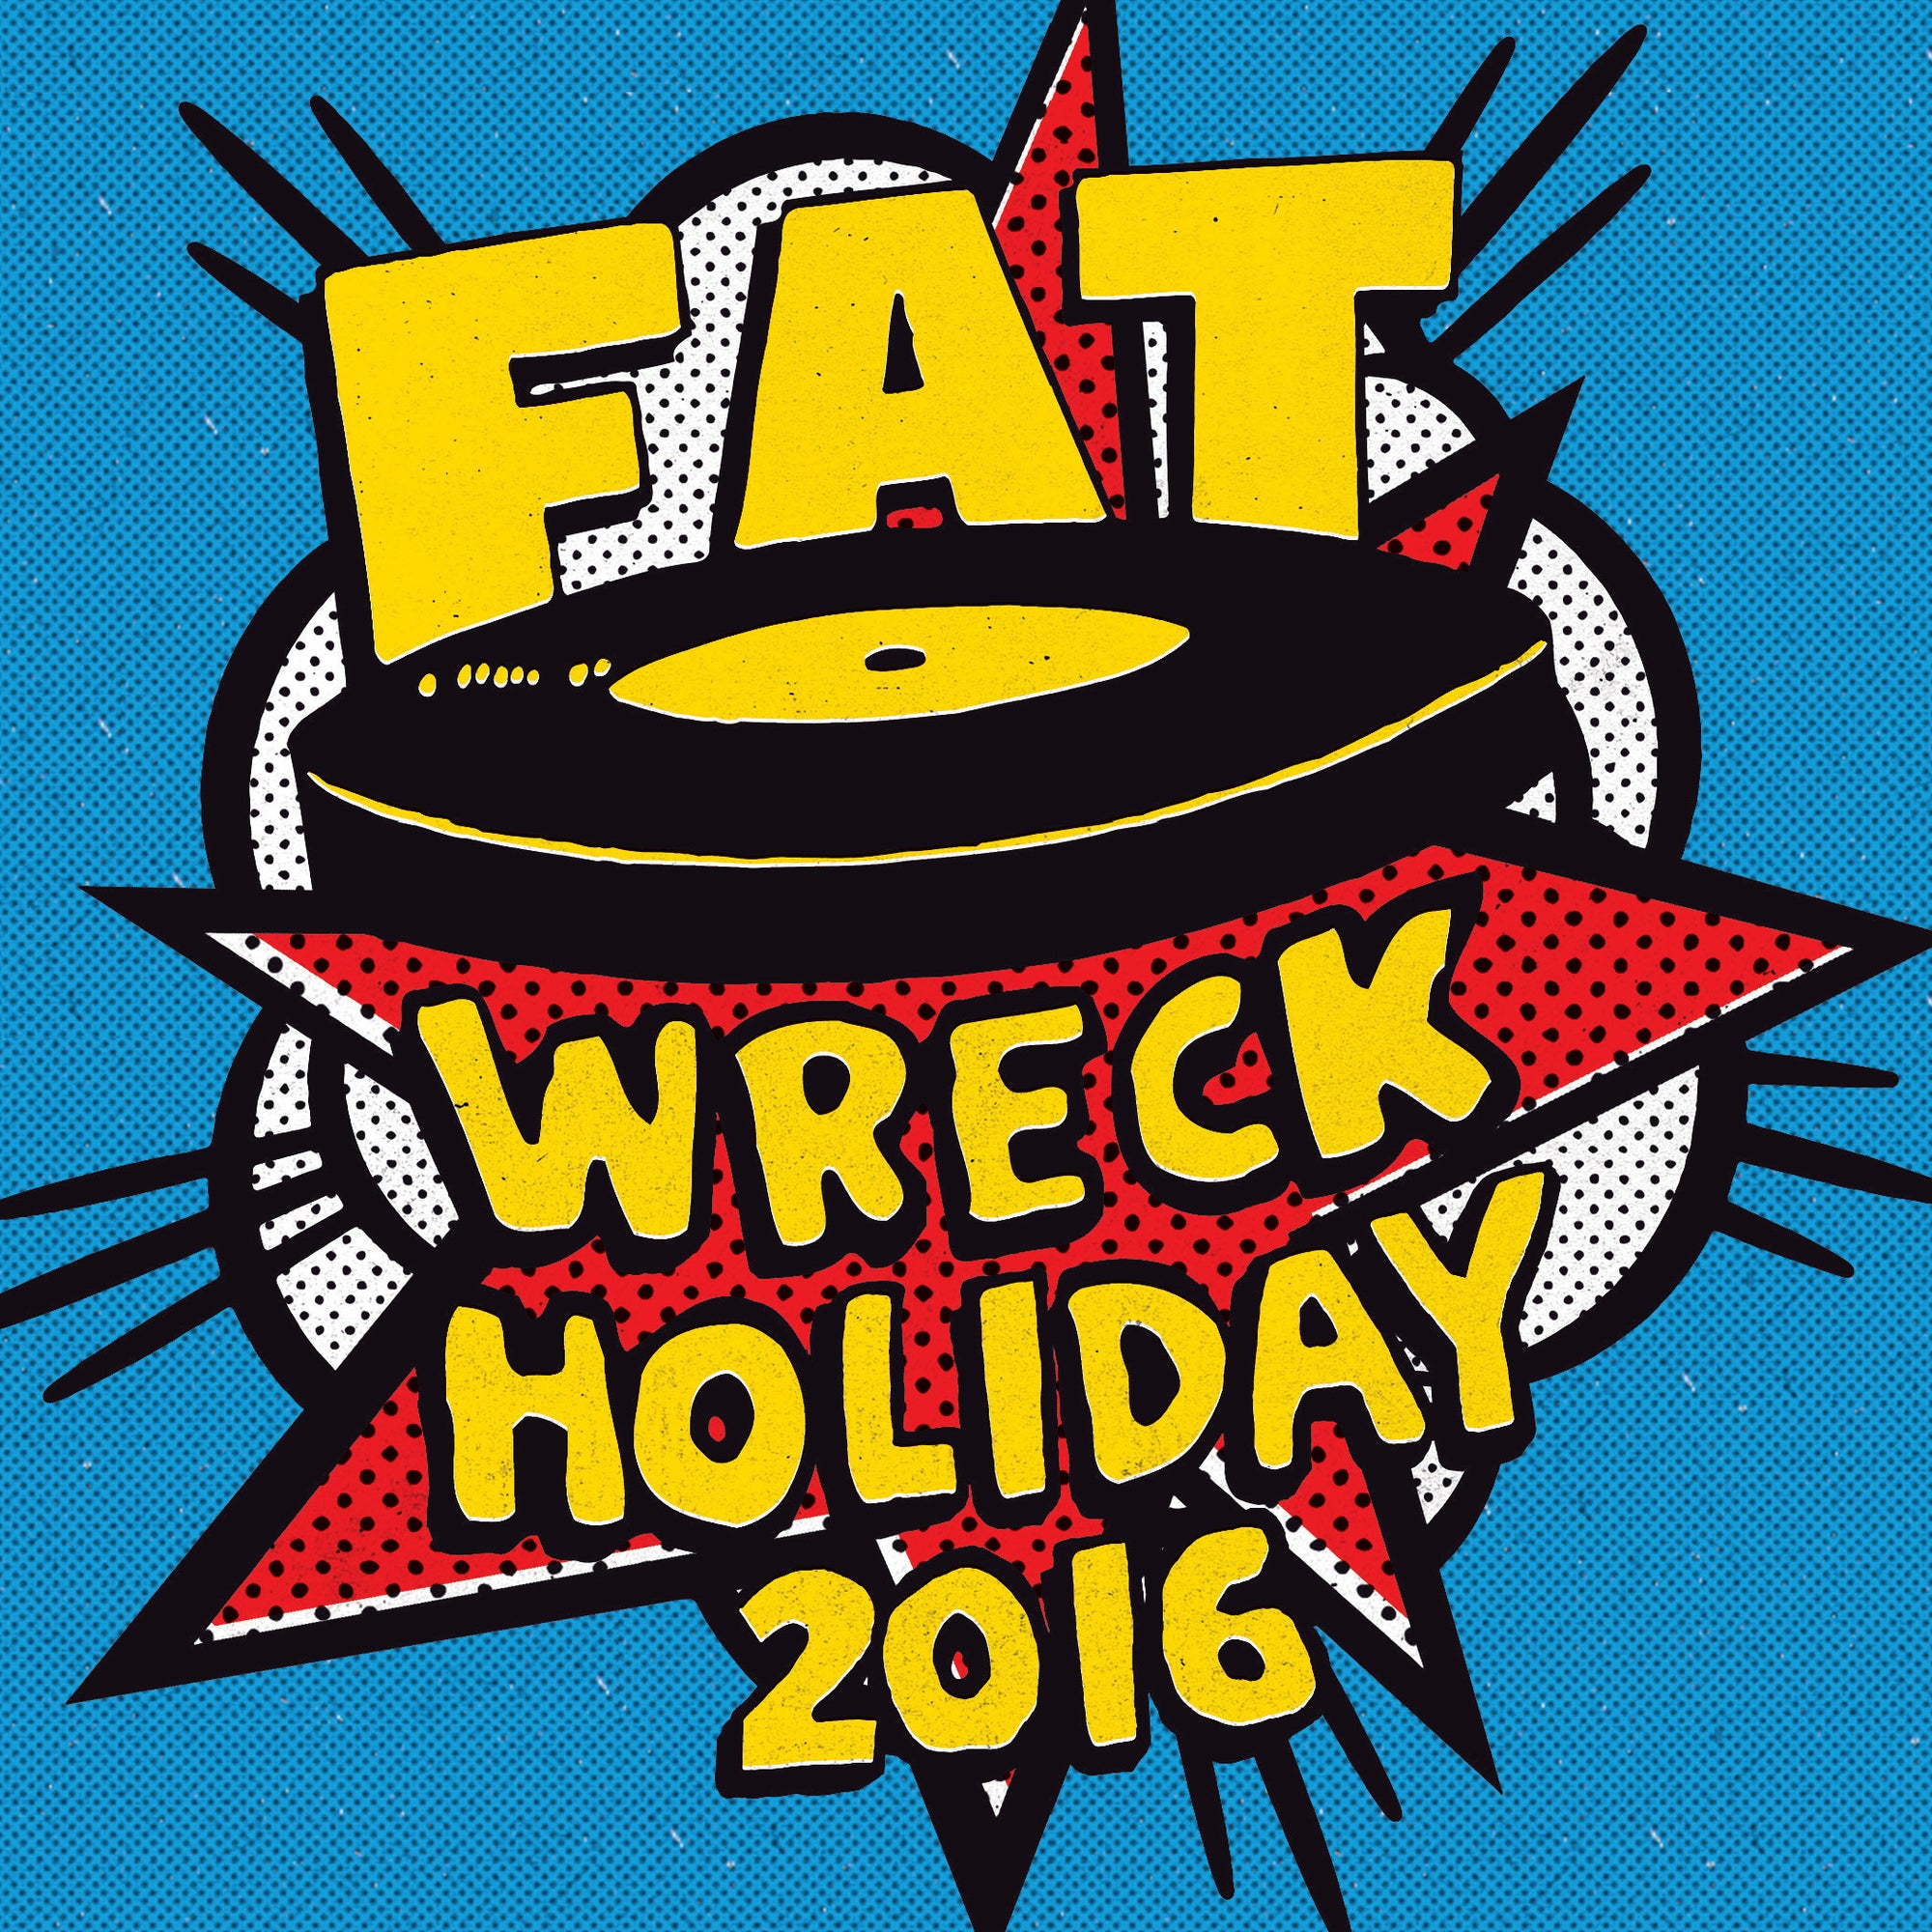 Fat Wreck Holiday 2016